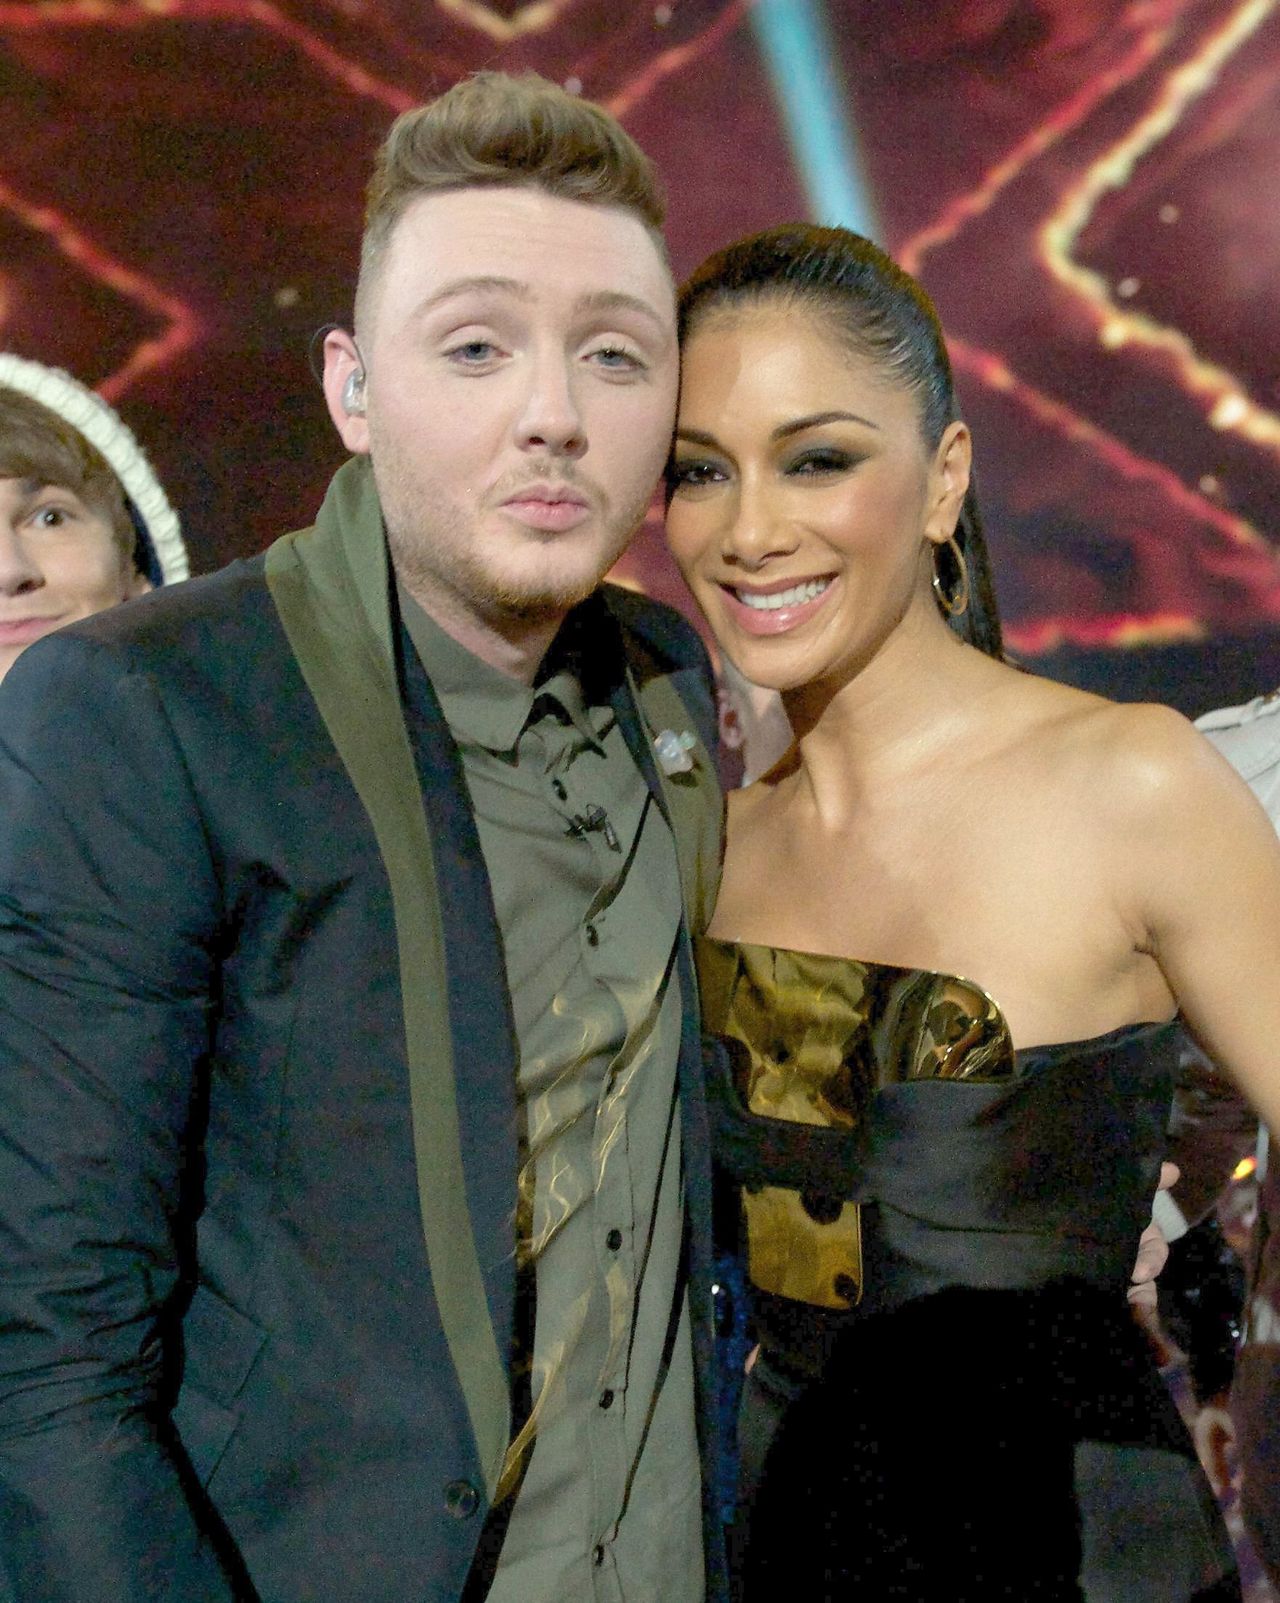 James with Nicole Scherzinger after he won 'The X Factor' in 2012